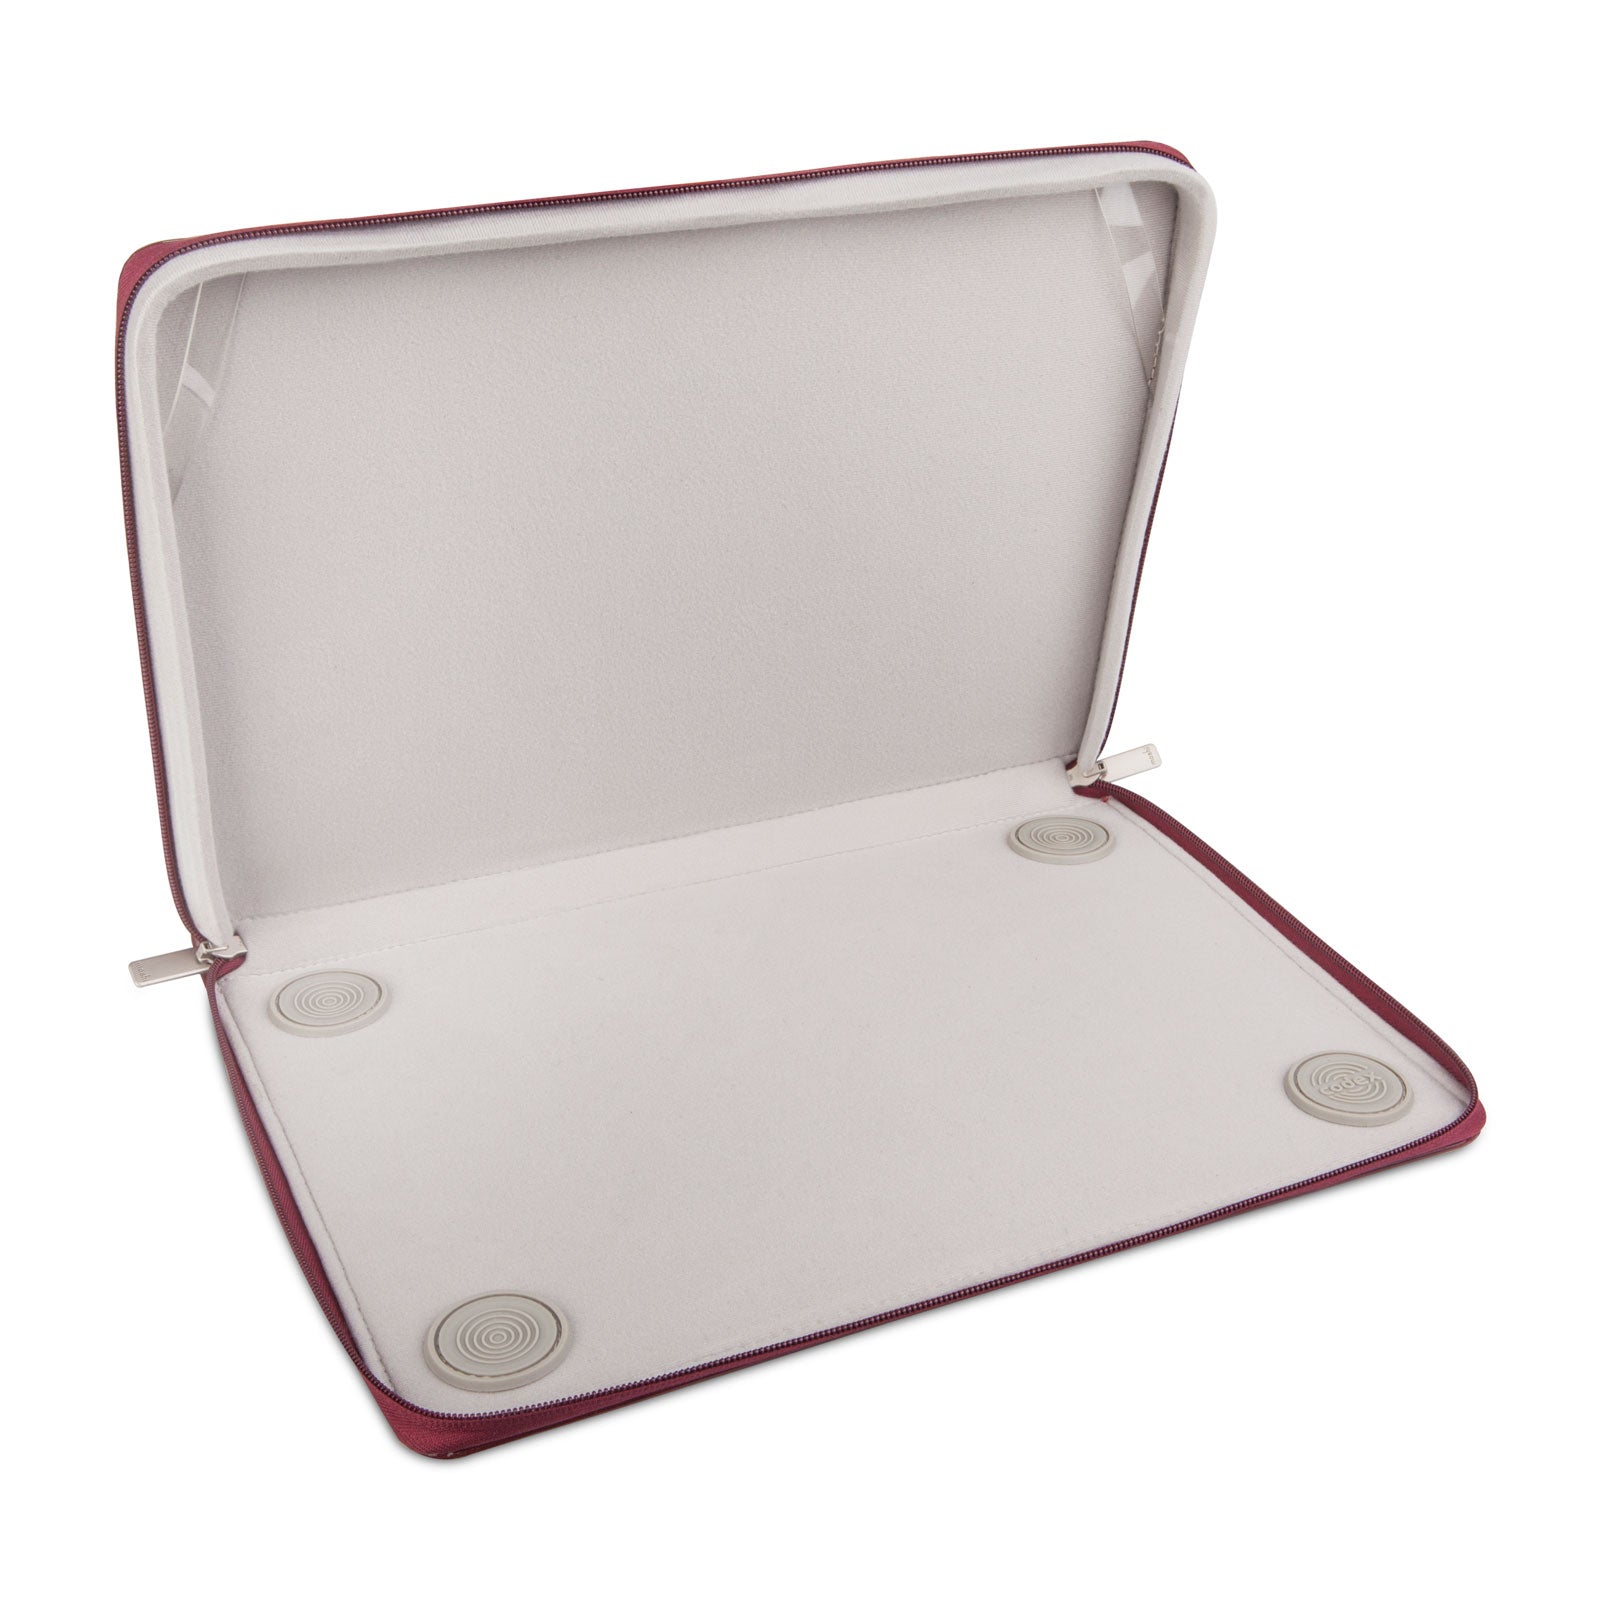 Moshi Codex 13" Protective Carrying Case for MacBook